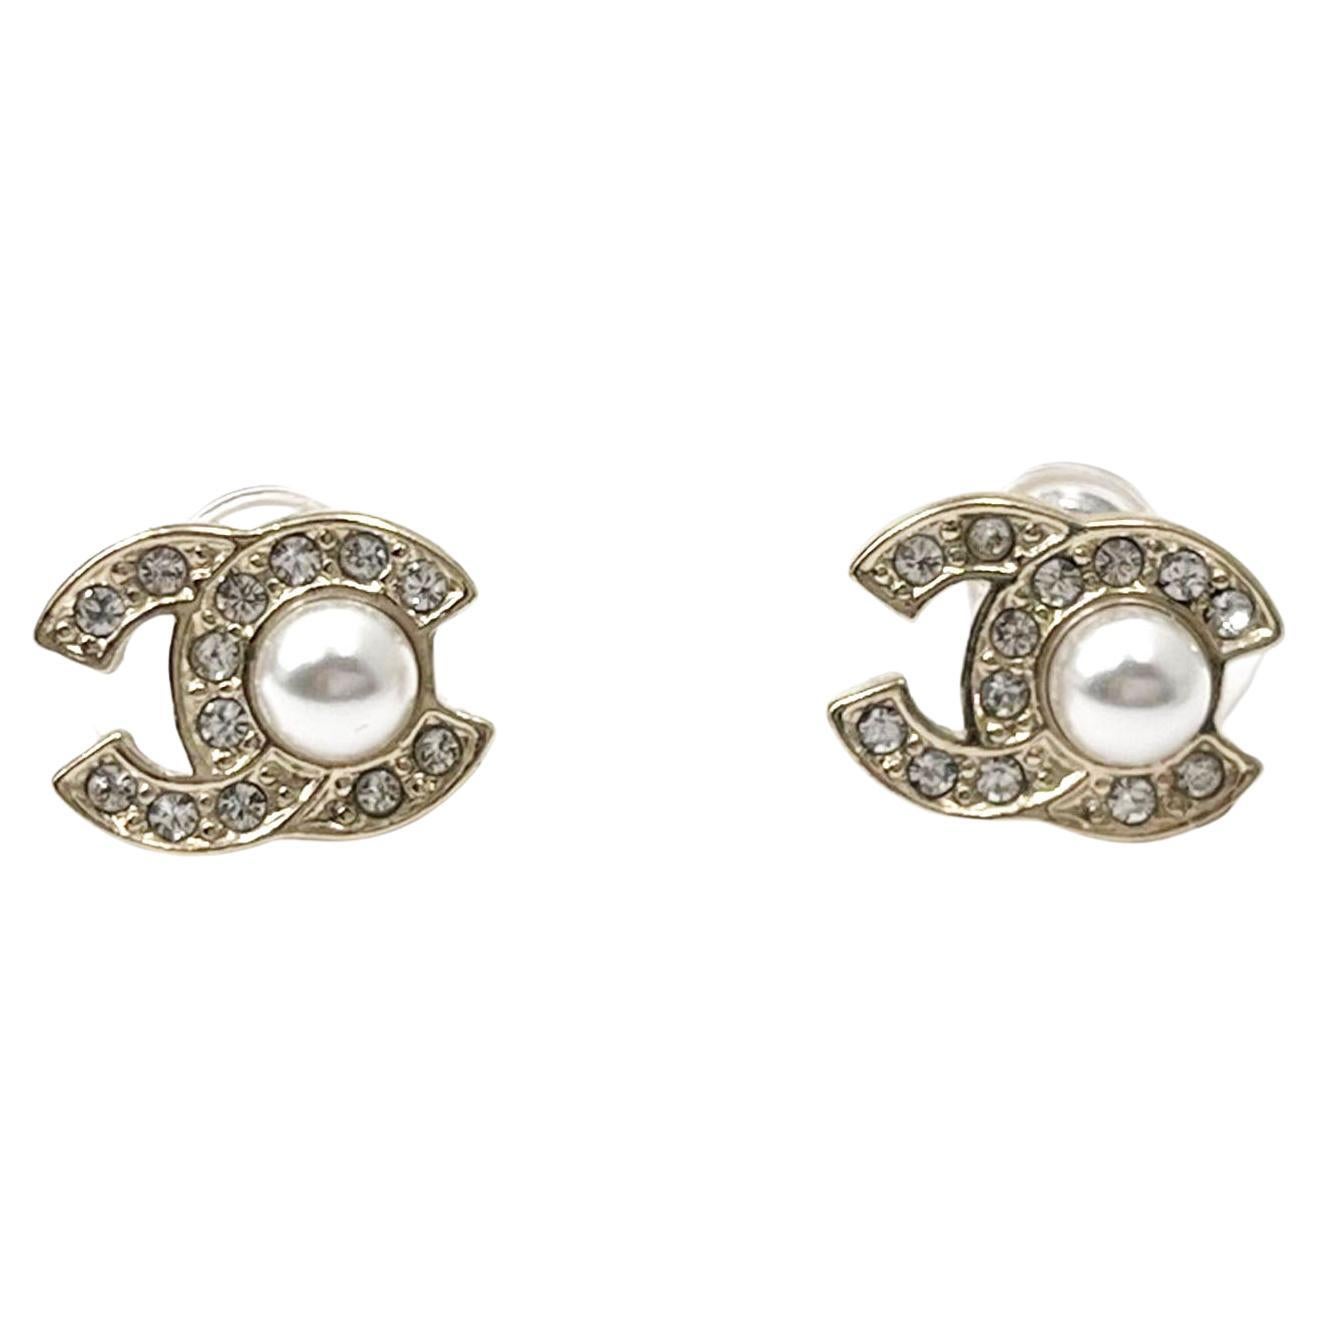 Chanel Brand New Classic Gold CC Center Pearl Small Earrings 